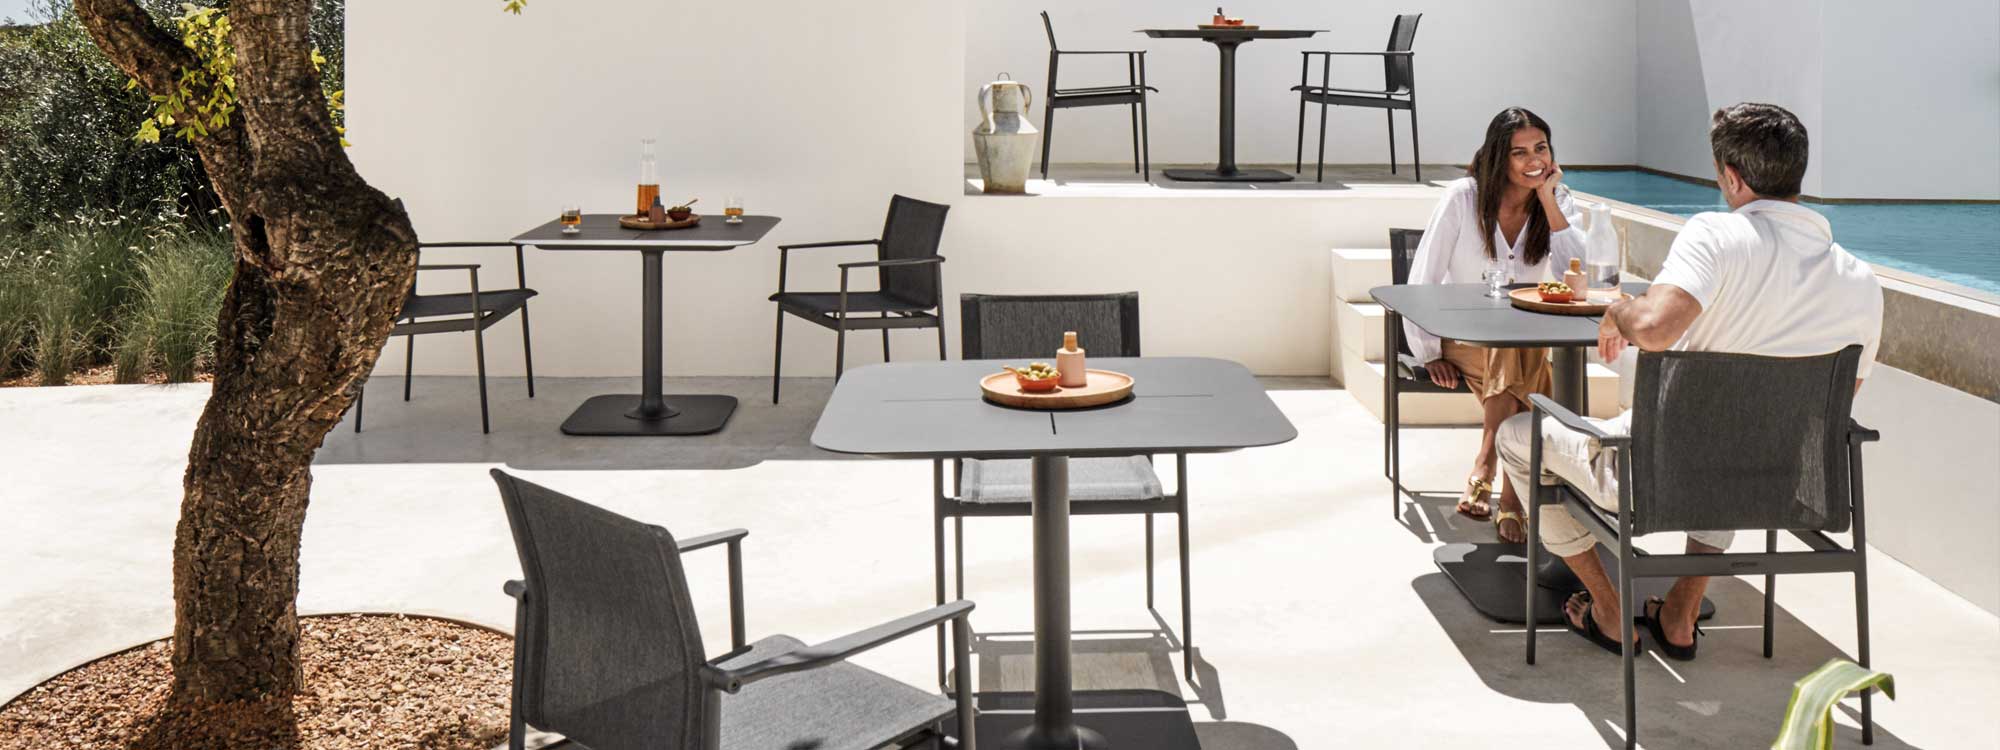 Image of 180 modern garden chairs and Grid bistro tables by Gloster in sunny courtyard